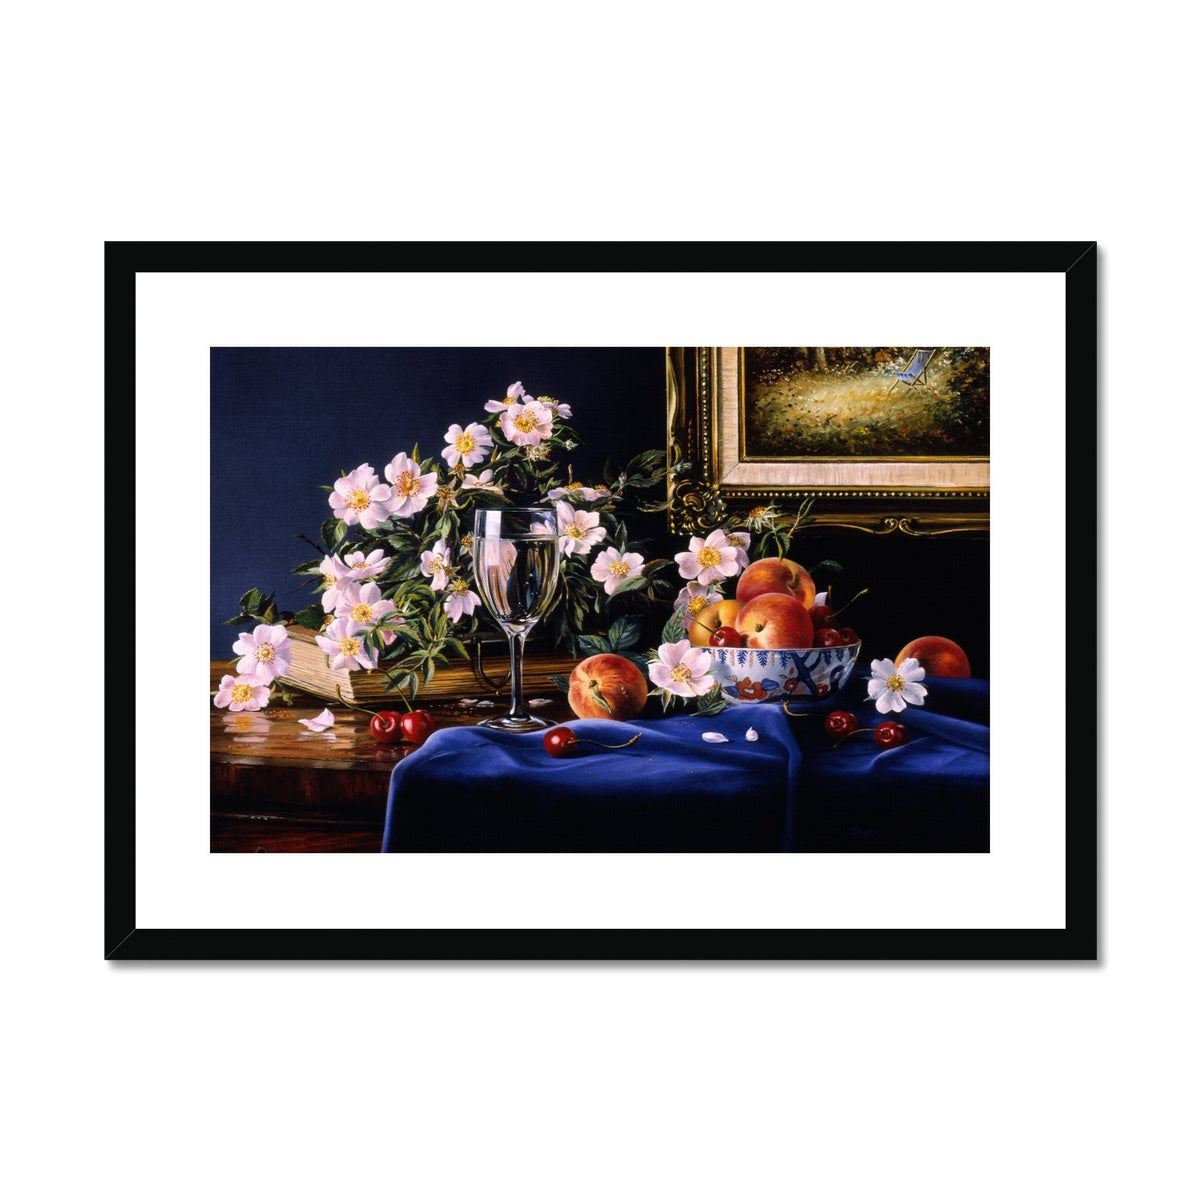 Ted Dyer Framed Open Edition Cornish Fine Art Print. 'Dog Roses and Peaches Still Life'. Cornwall Art Gallery